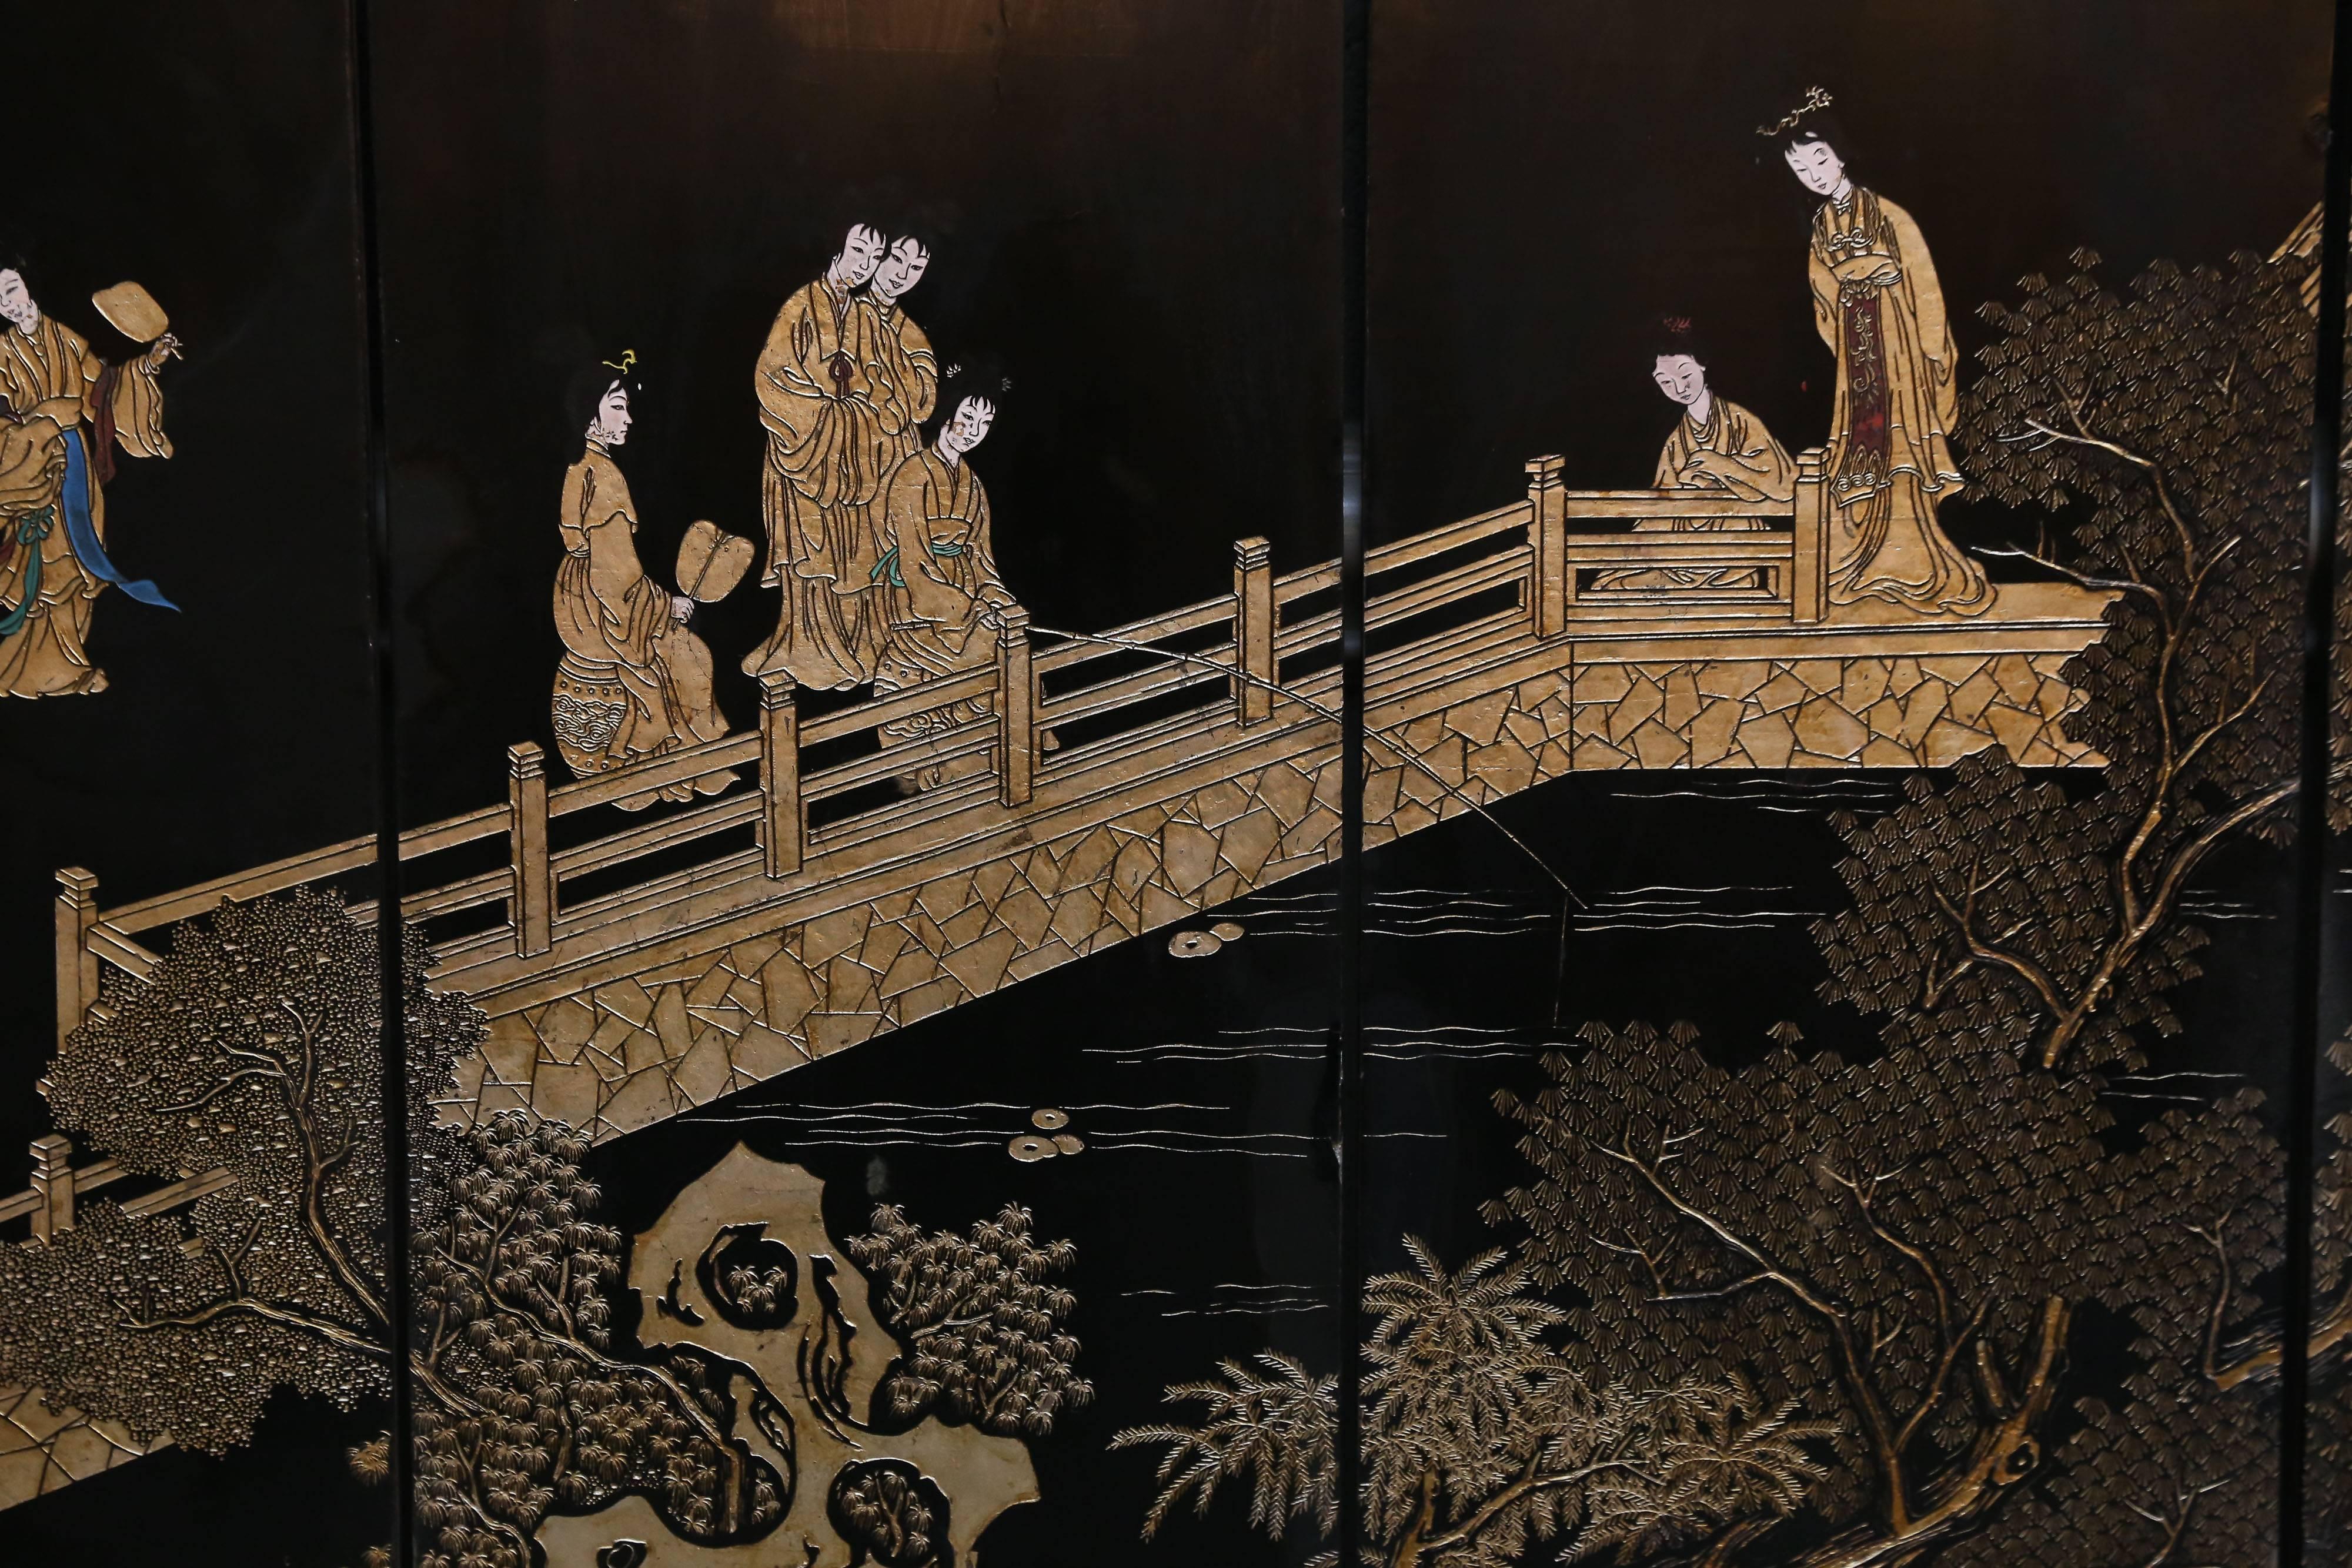 Coromandel screen features the story of a wealthy Chinese family.
A woman in the family is shown fishing on a bridge with a servant fanning her.
Another panel has the Matriarch walking with her son giving him advice.

At the bottom of each panel